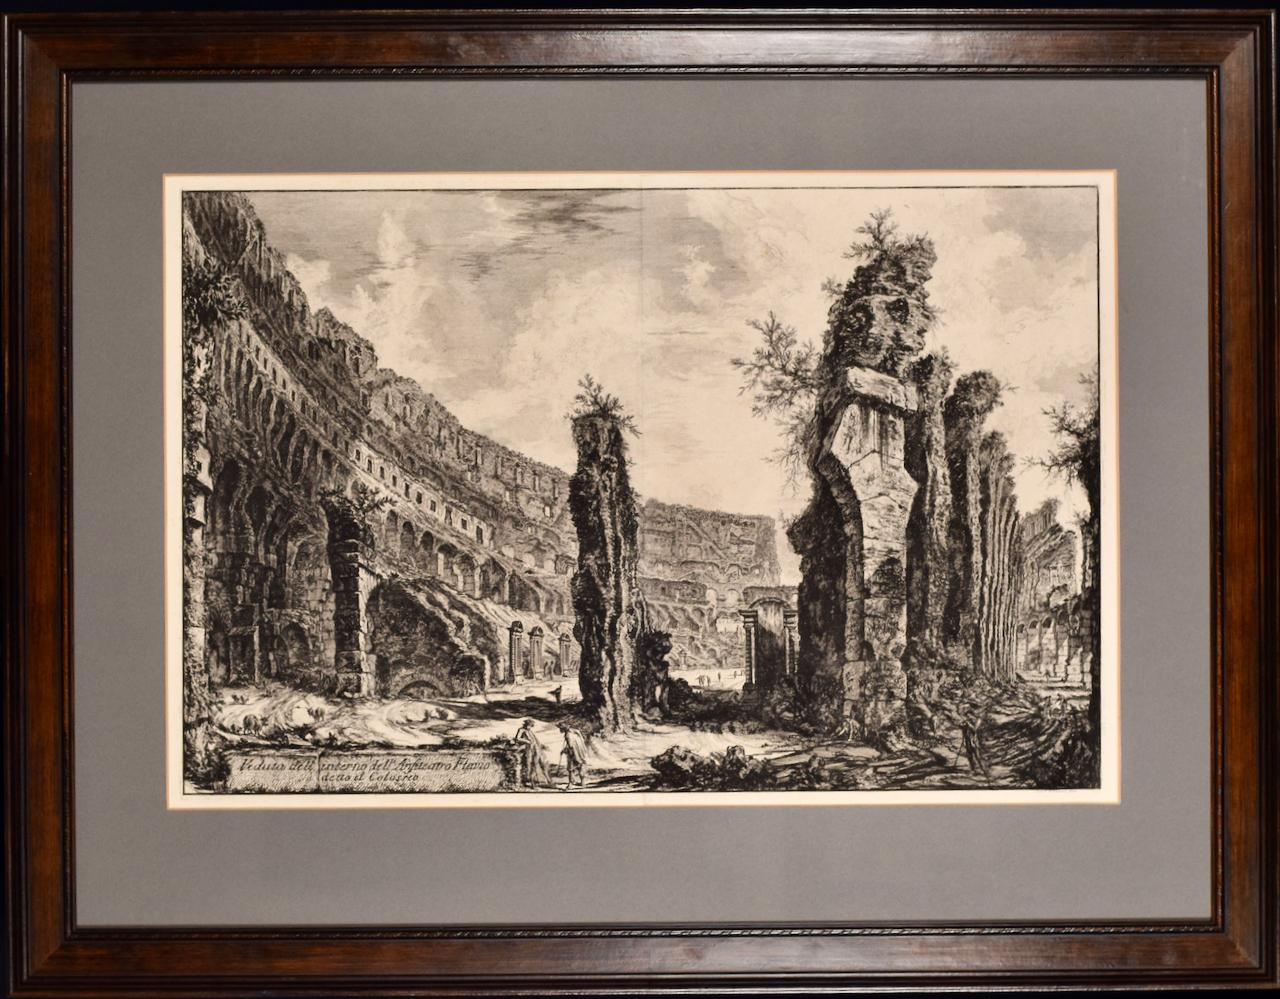 The Roman Colosseum: A Framed 18th Century Etching of the Interior by Piranesi